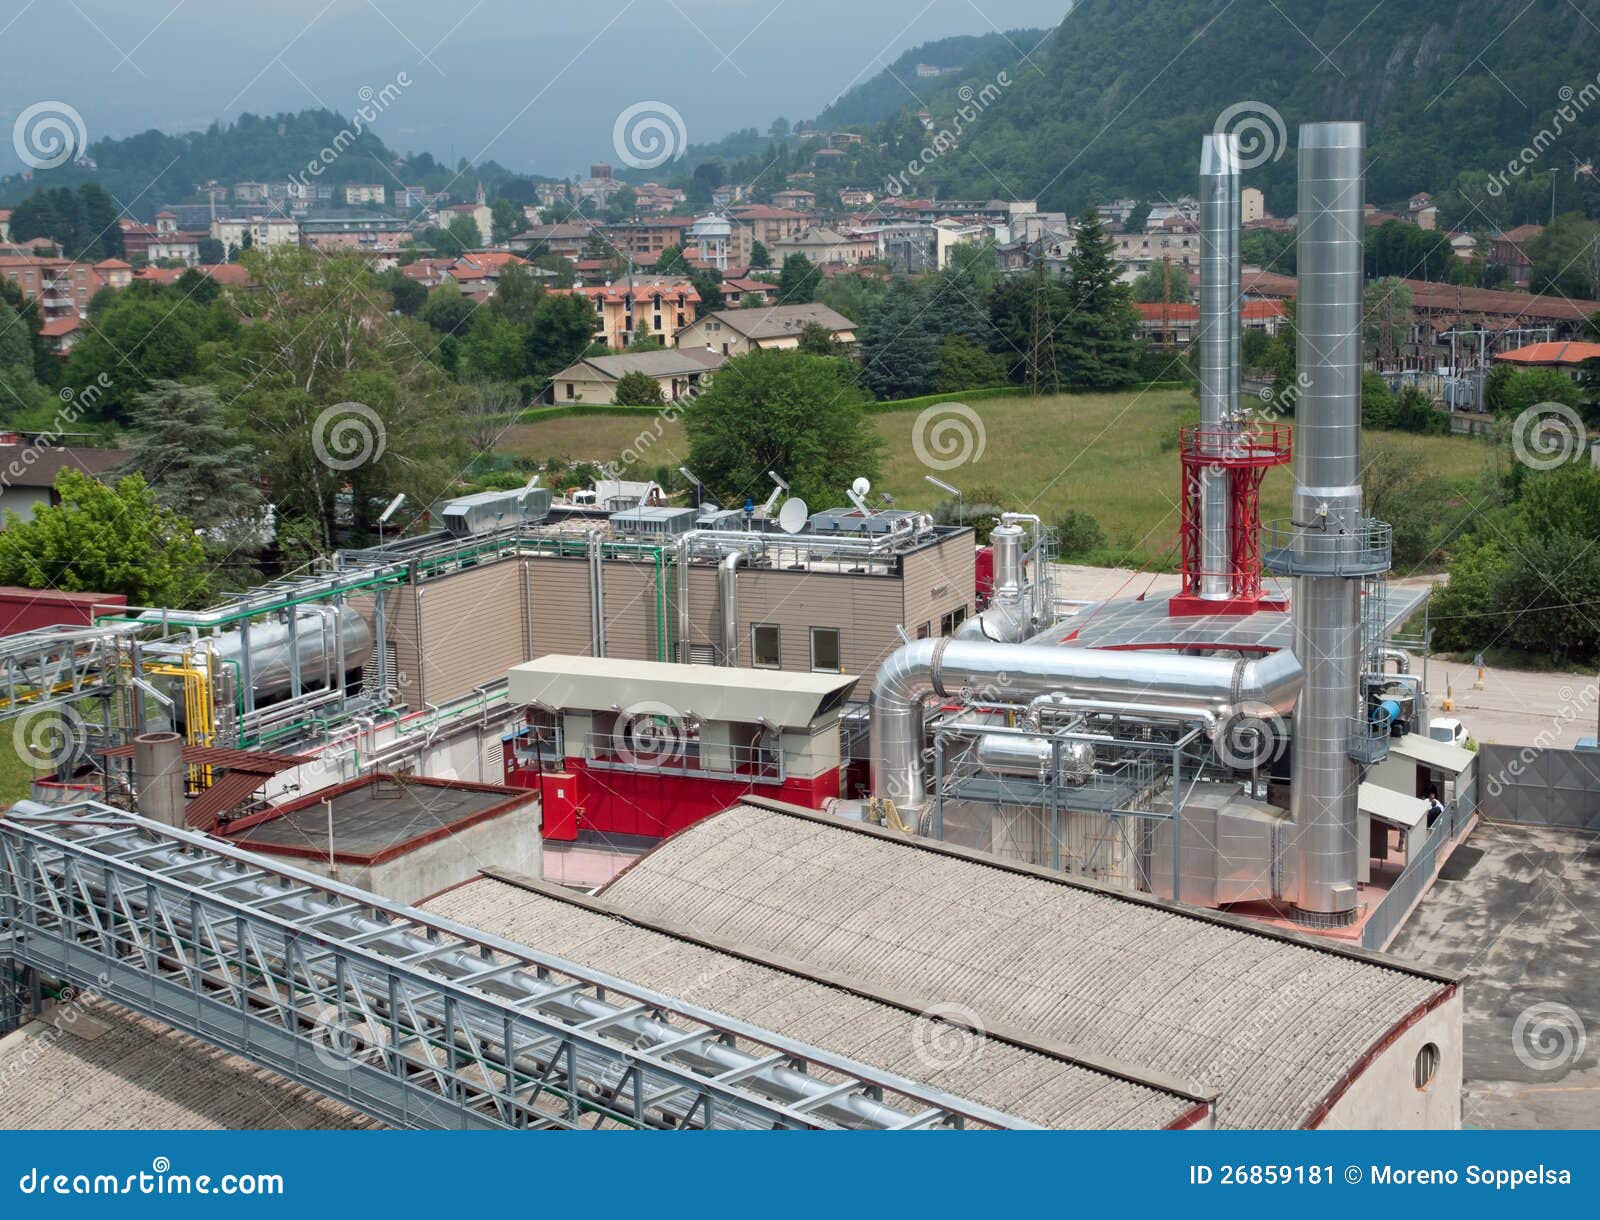 paper and pulp mill - cogeneration plant